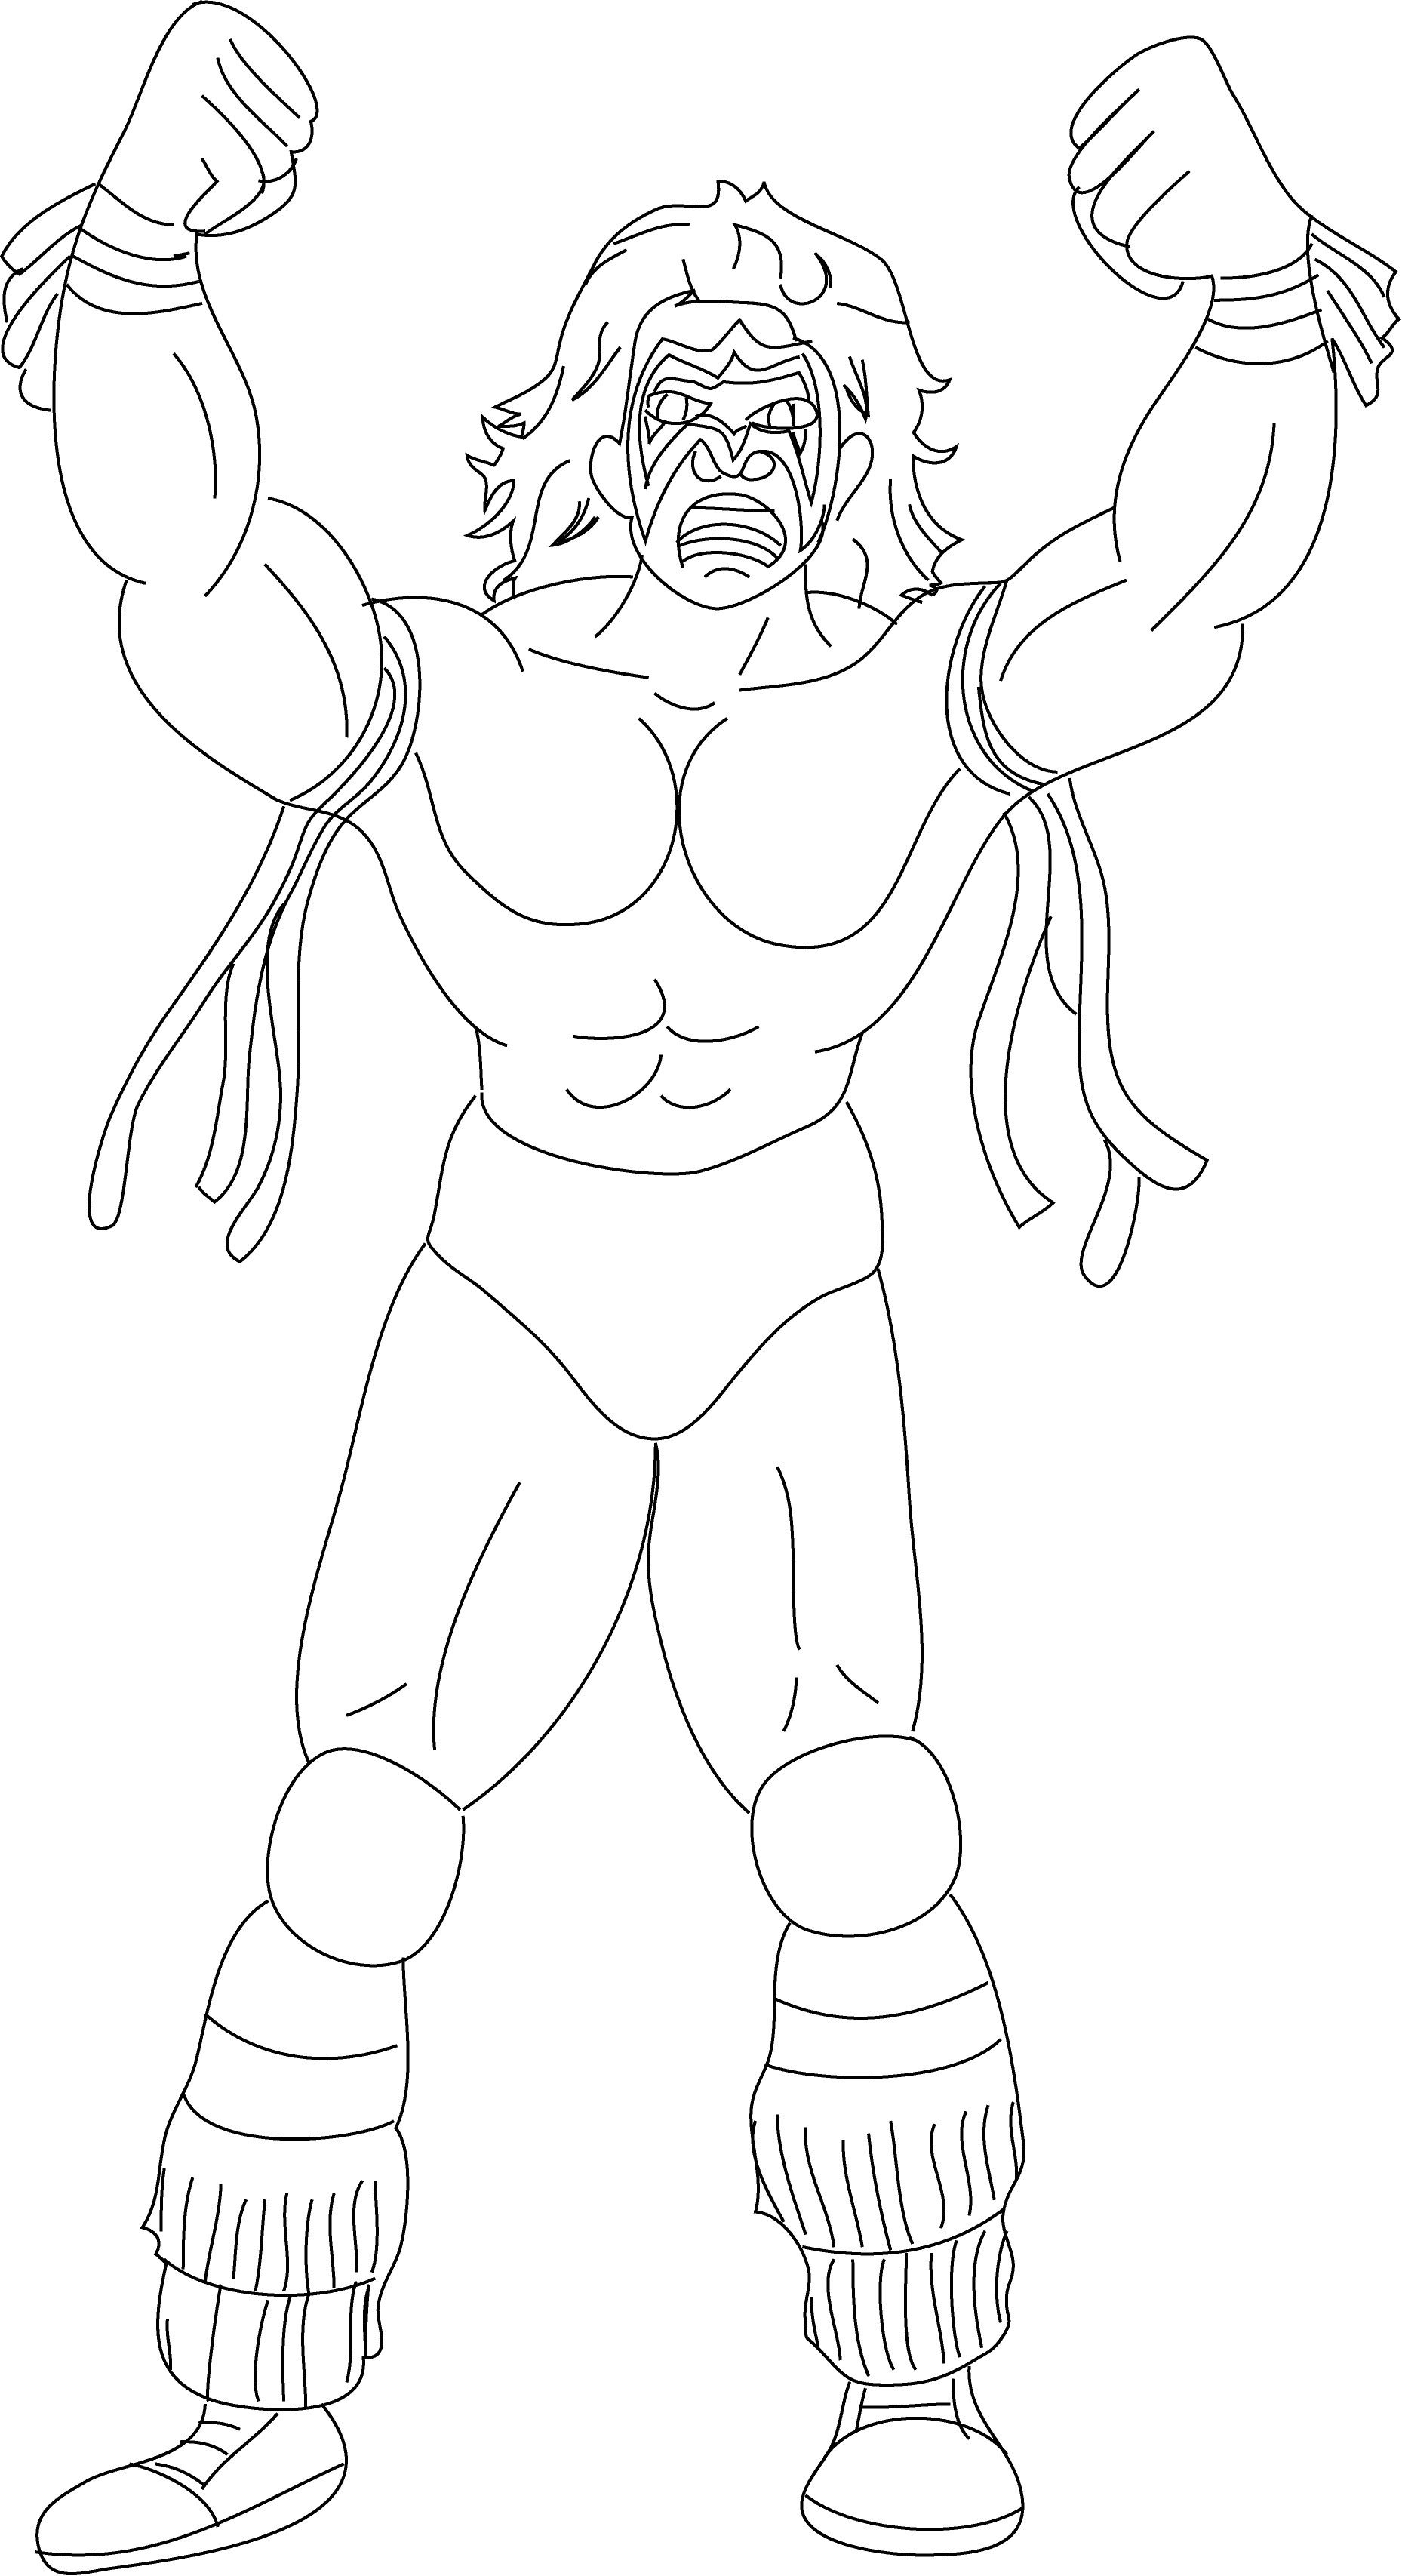 Wwe Logo Coloring Pages at GetColorings.com | Free ...